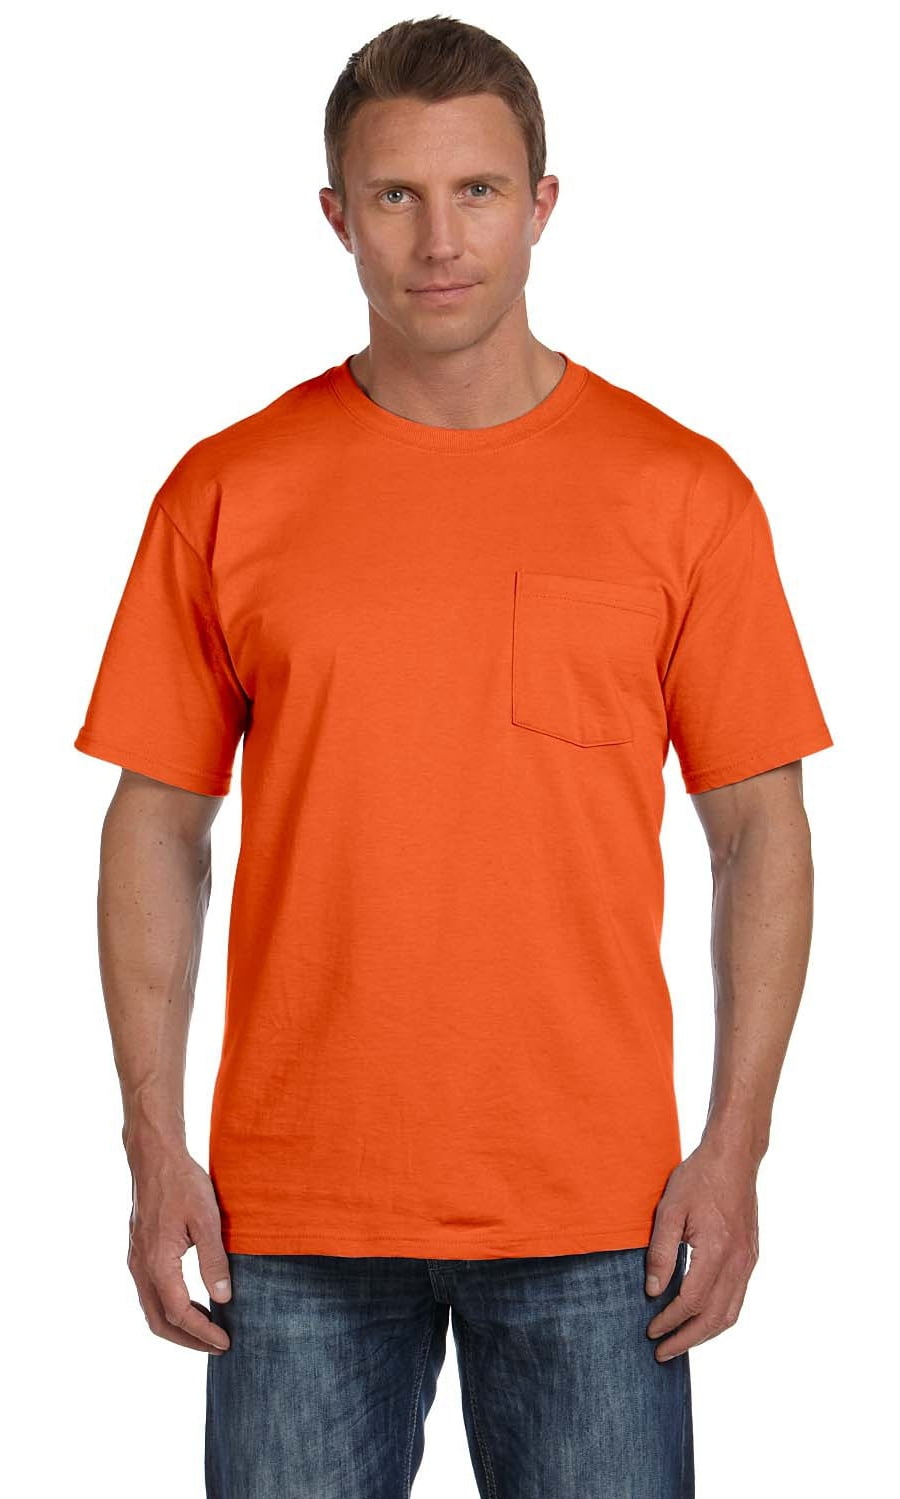 The walmart t pocket the shirts loom fruit games of